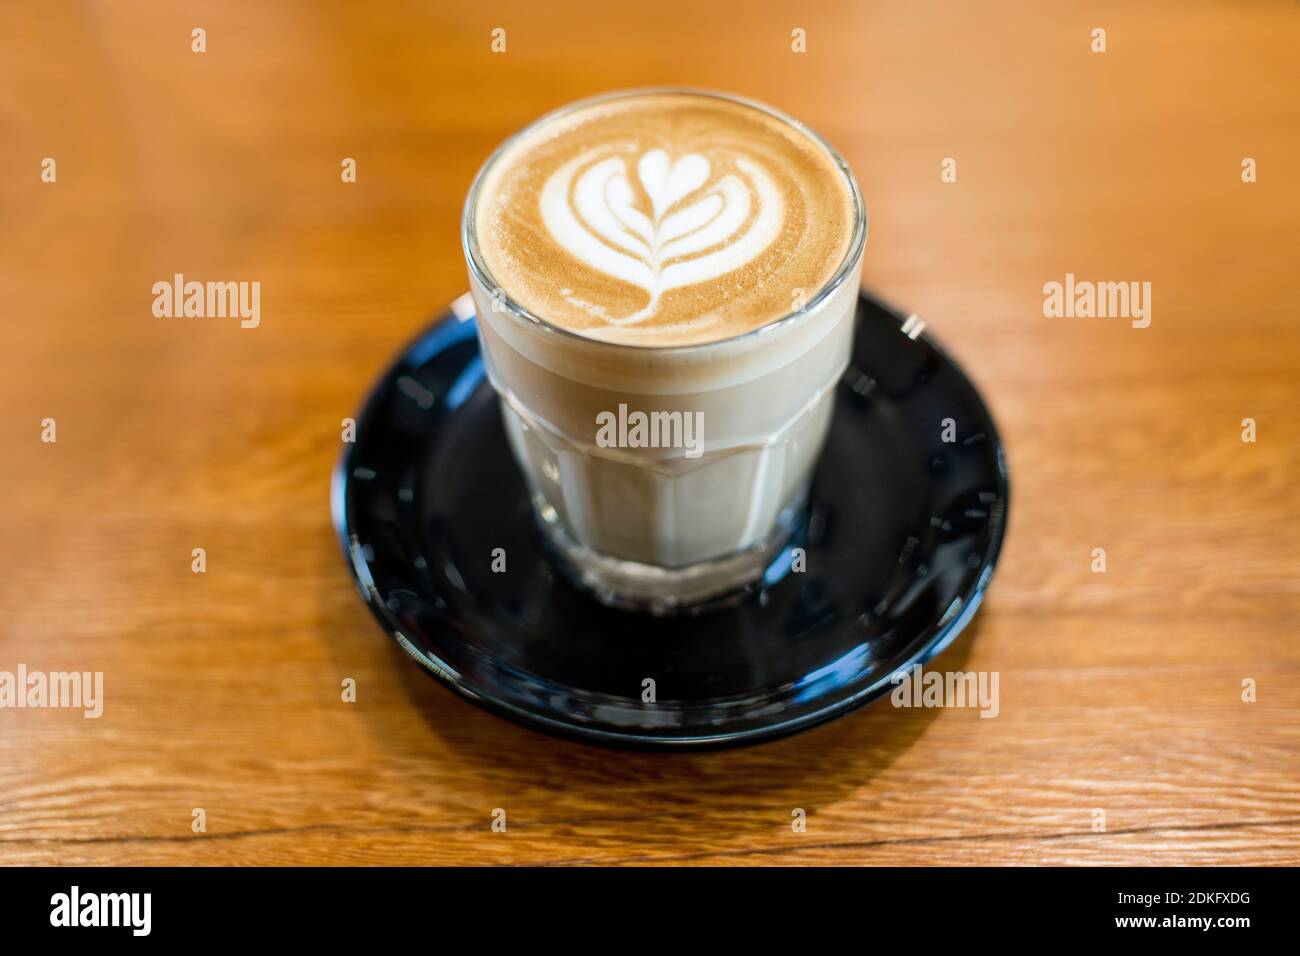 High Angle View Of Coffee On Table Stock Photo